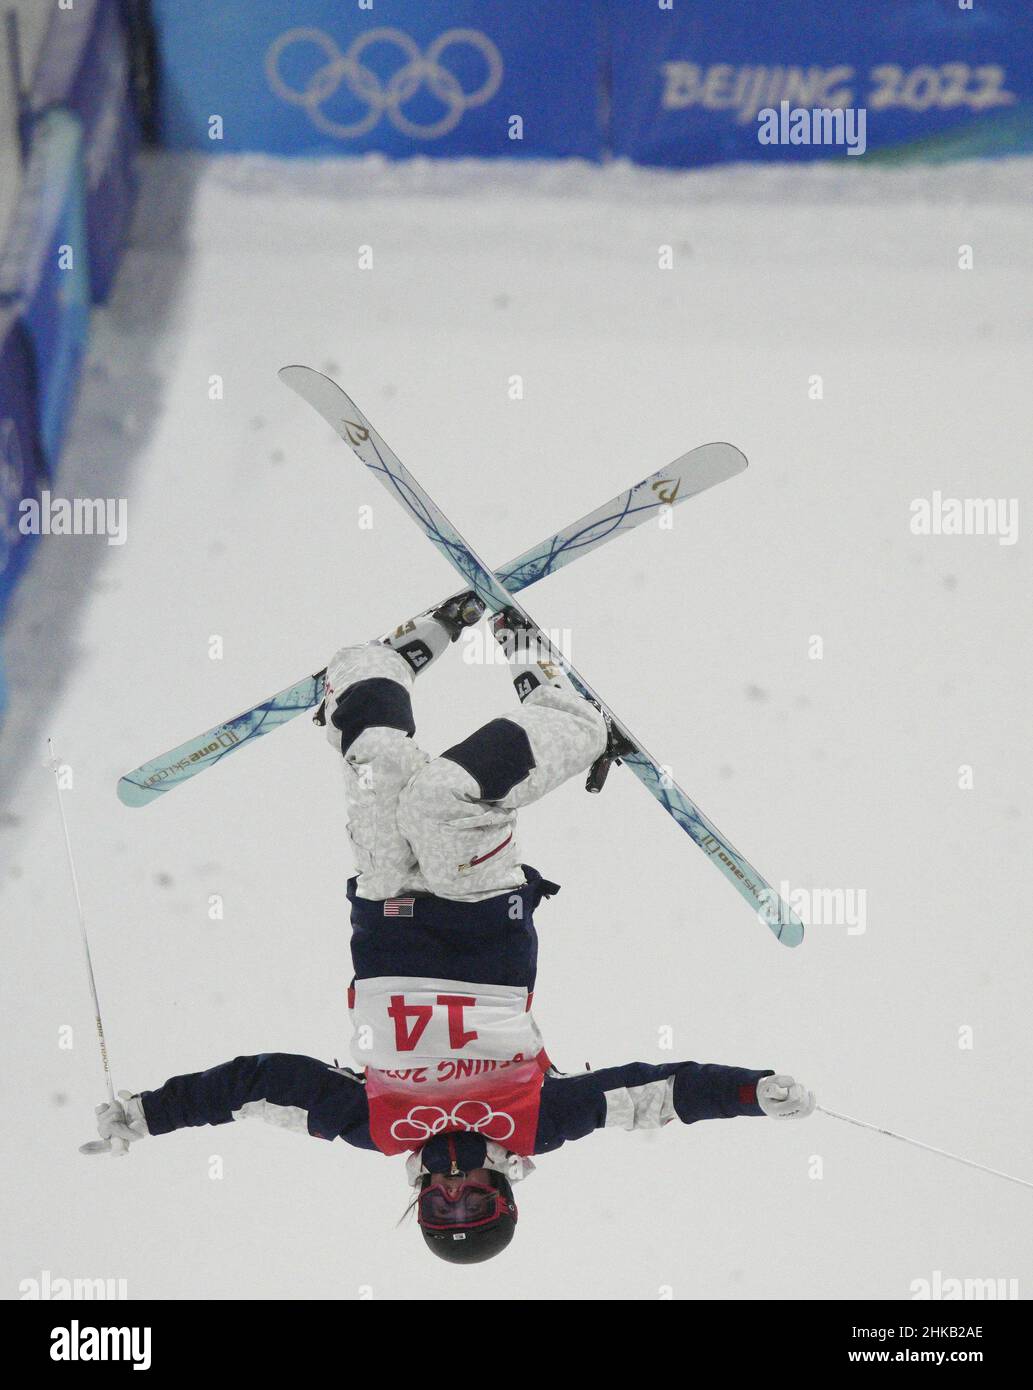 Zhangjiakou, China. 03rd Feb, 2022. Jaelin Kauf of the United States competes in a qualification round in the Women's Moguls Freestyle Skiing competition at Genting Snow Park at the 2022 Winter Olympics in Zhangjiakou, China on Thursday, February 3, 2022. Photo by Bob Strong/UPI Credit: UPI/Alamy Live News Stock Photo